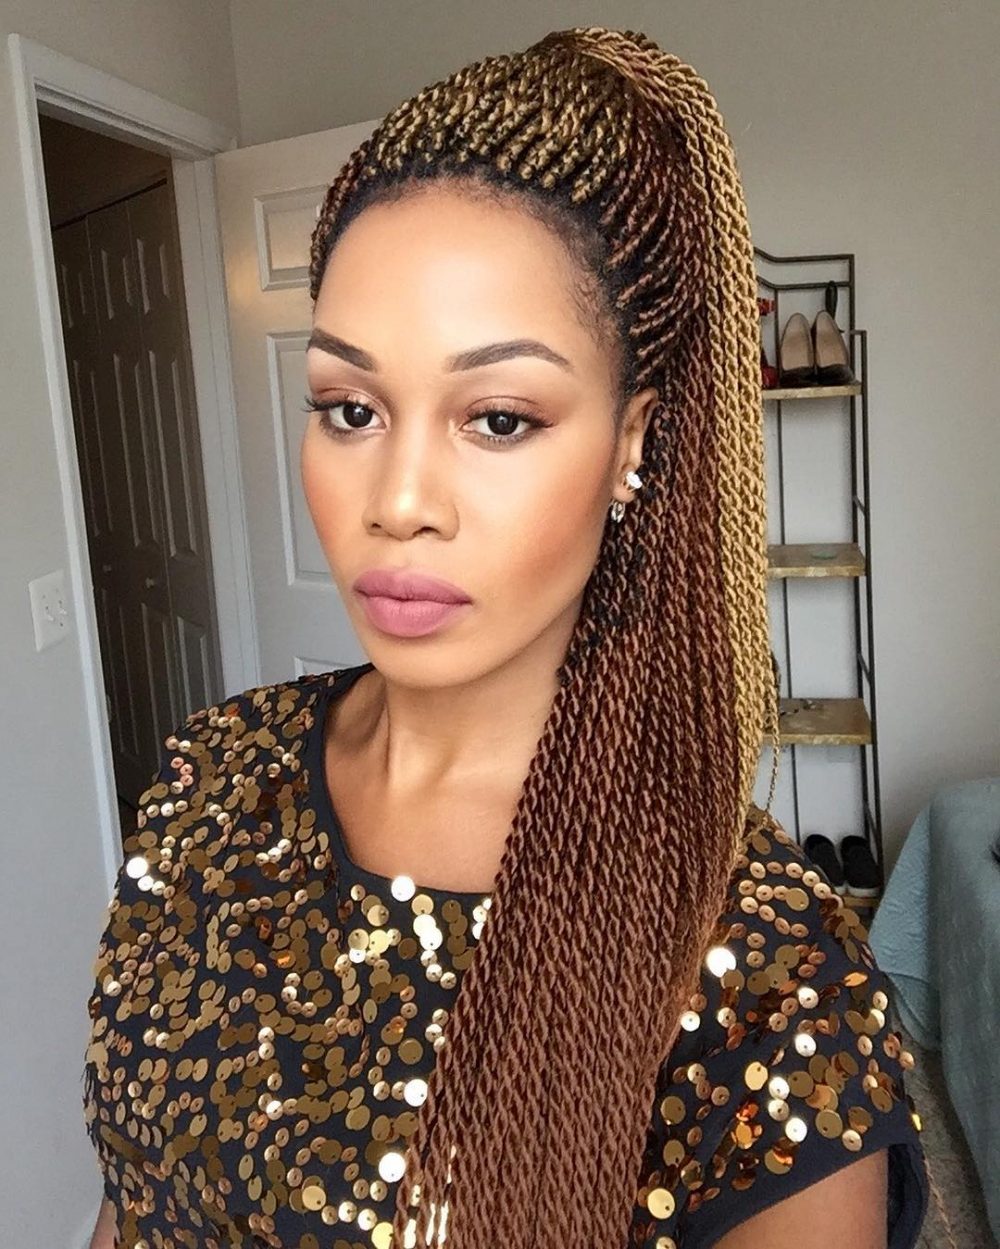 is a pop protective hairstyle for dark women who encompass their natural pi...